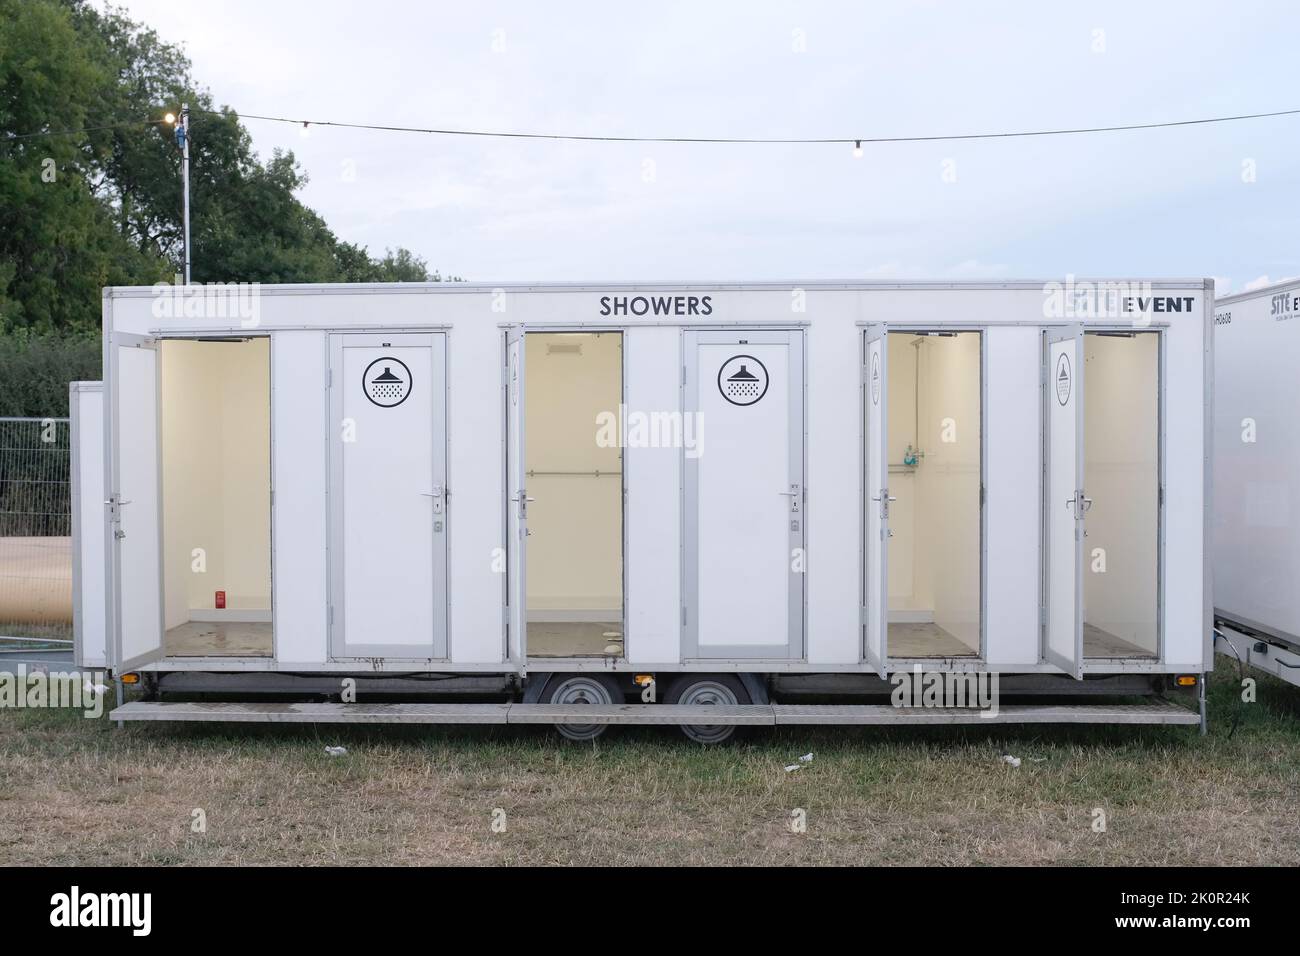 SHOWERS AT A FESTIVAL Stock Photo